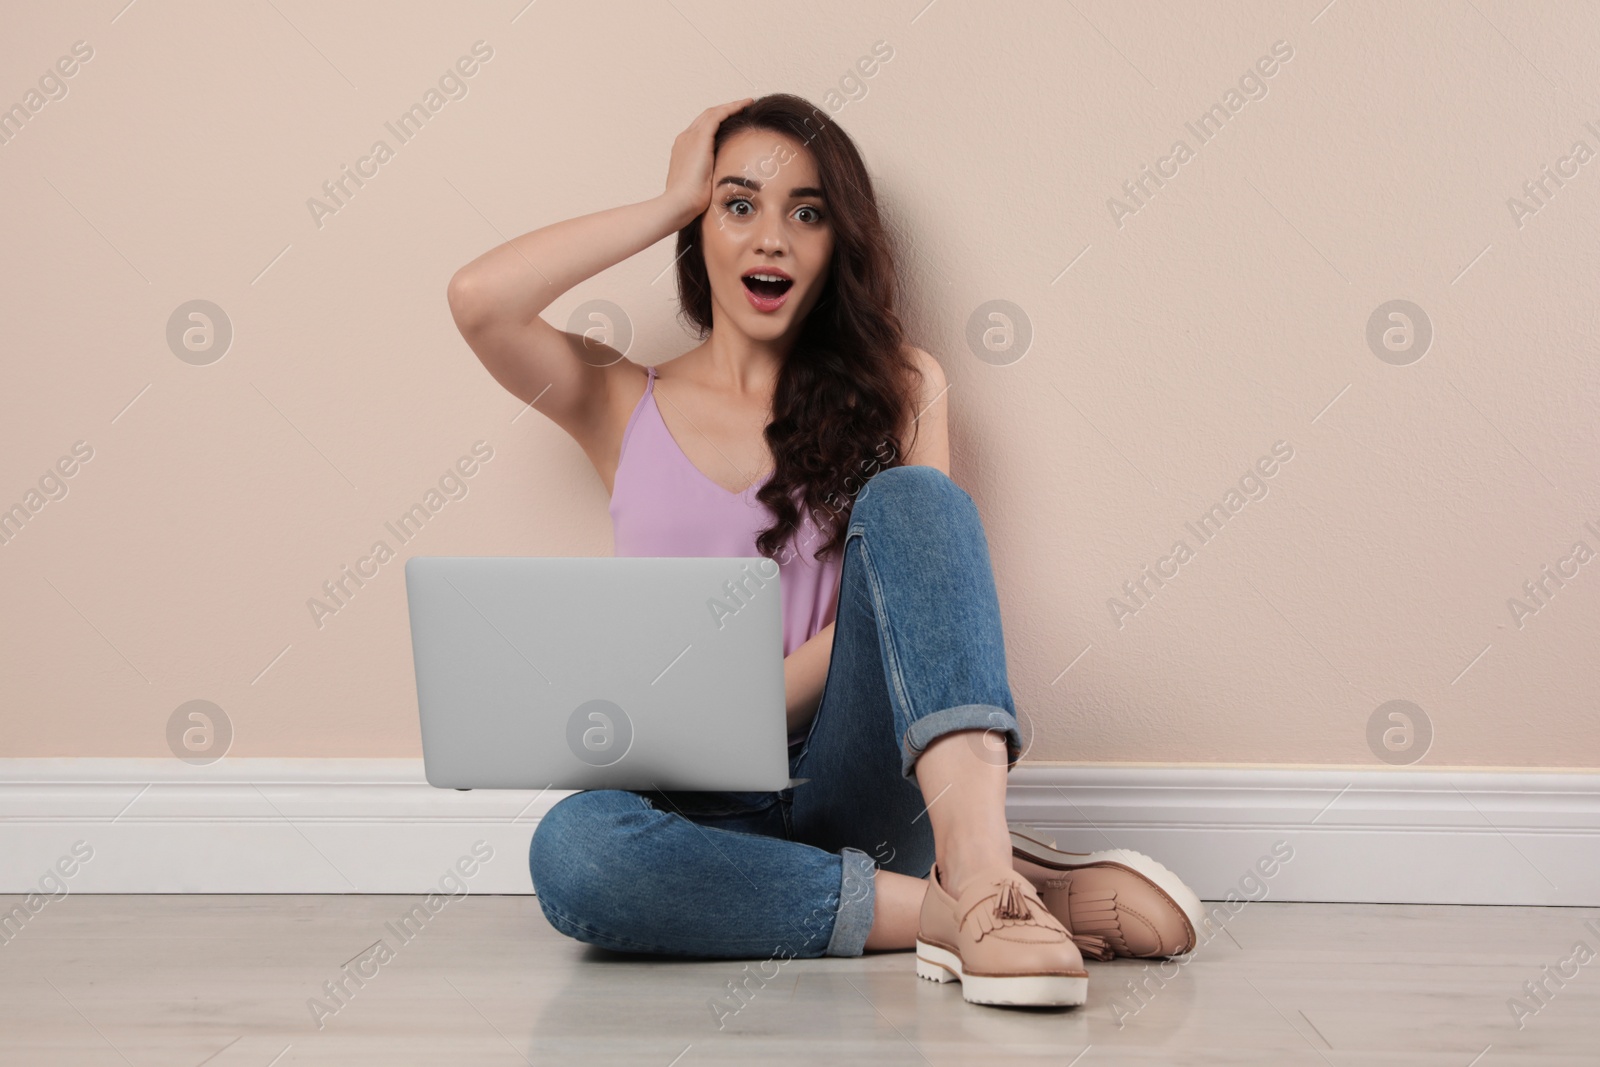 Photo of Shocked young woman sitting with laptop near beige wall